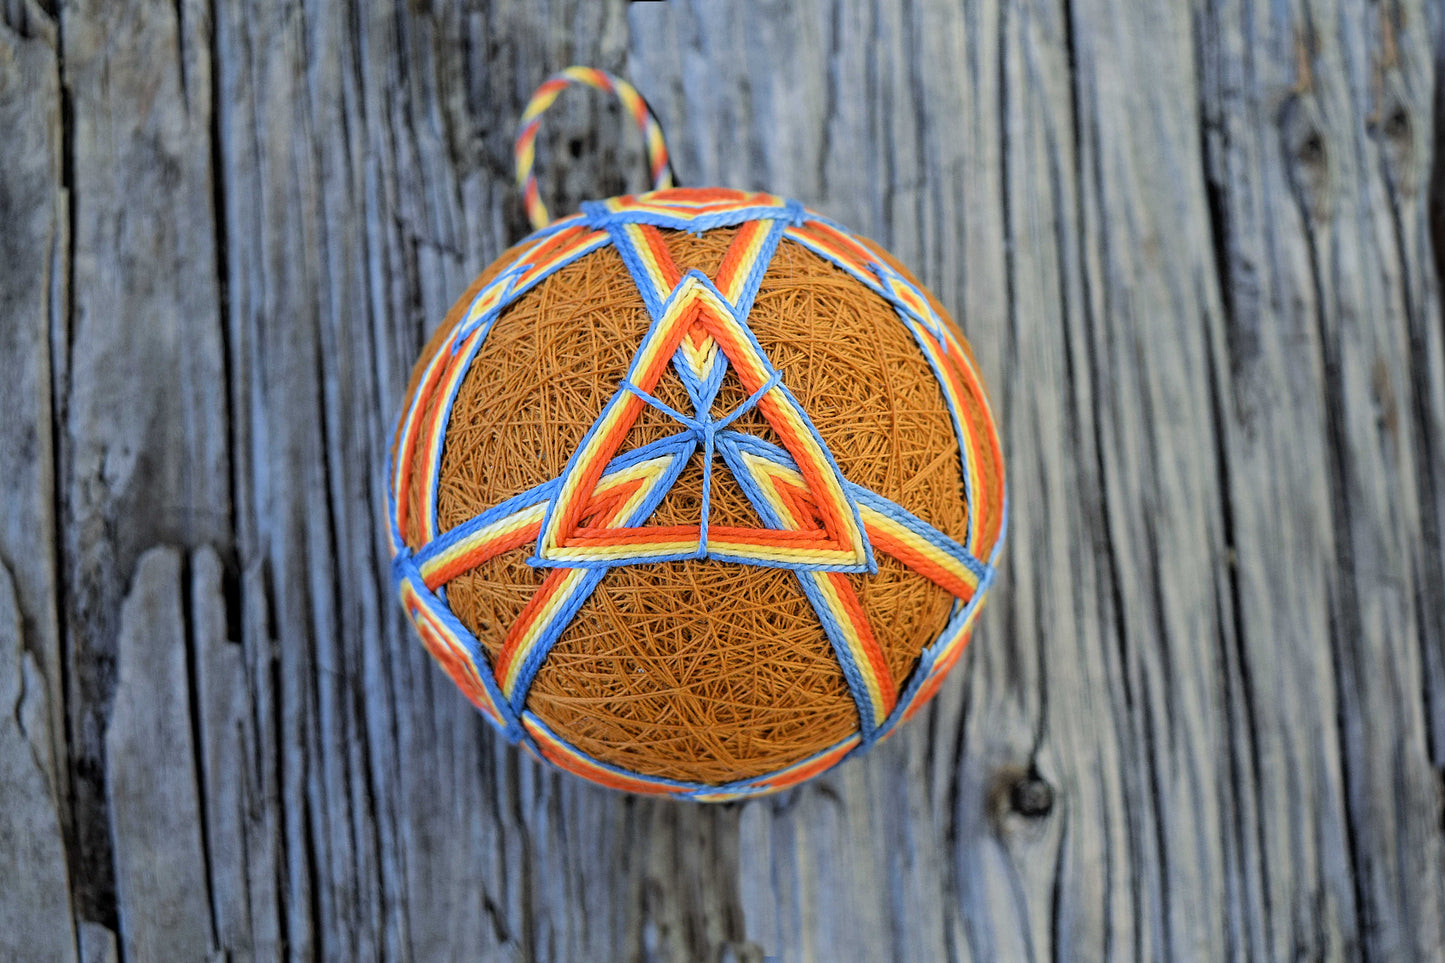 Japanese temari ball with triangles in orange on gold